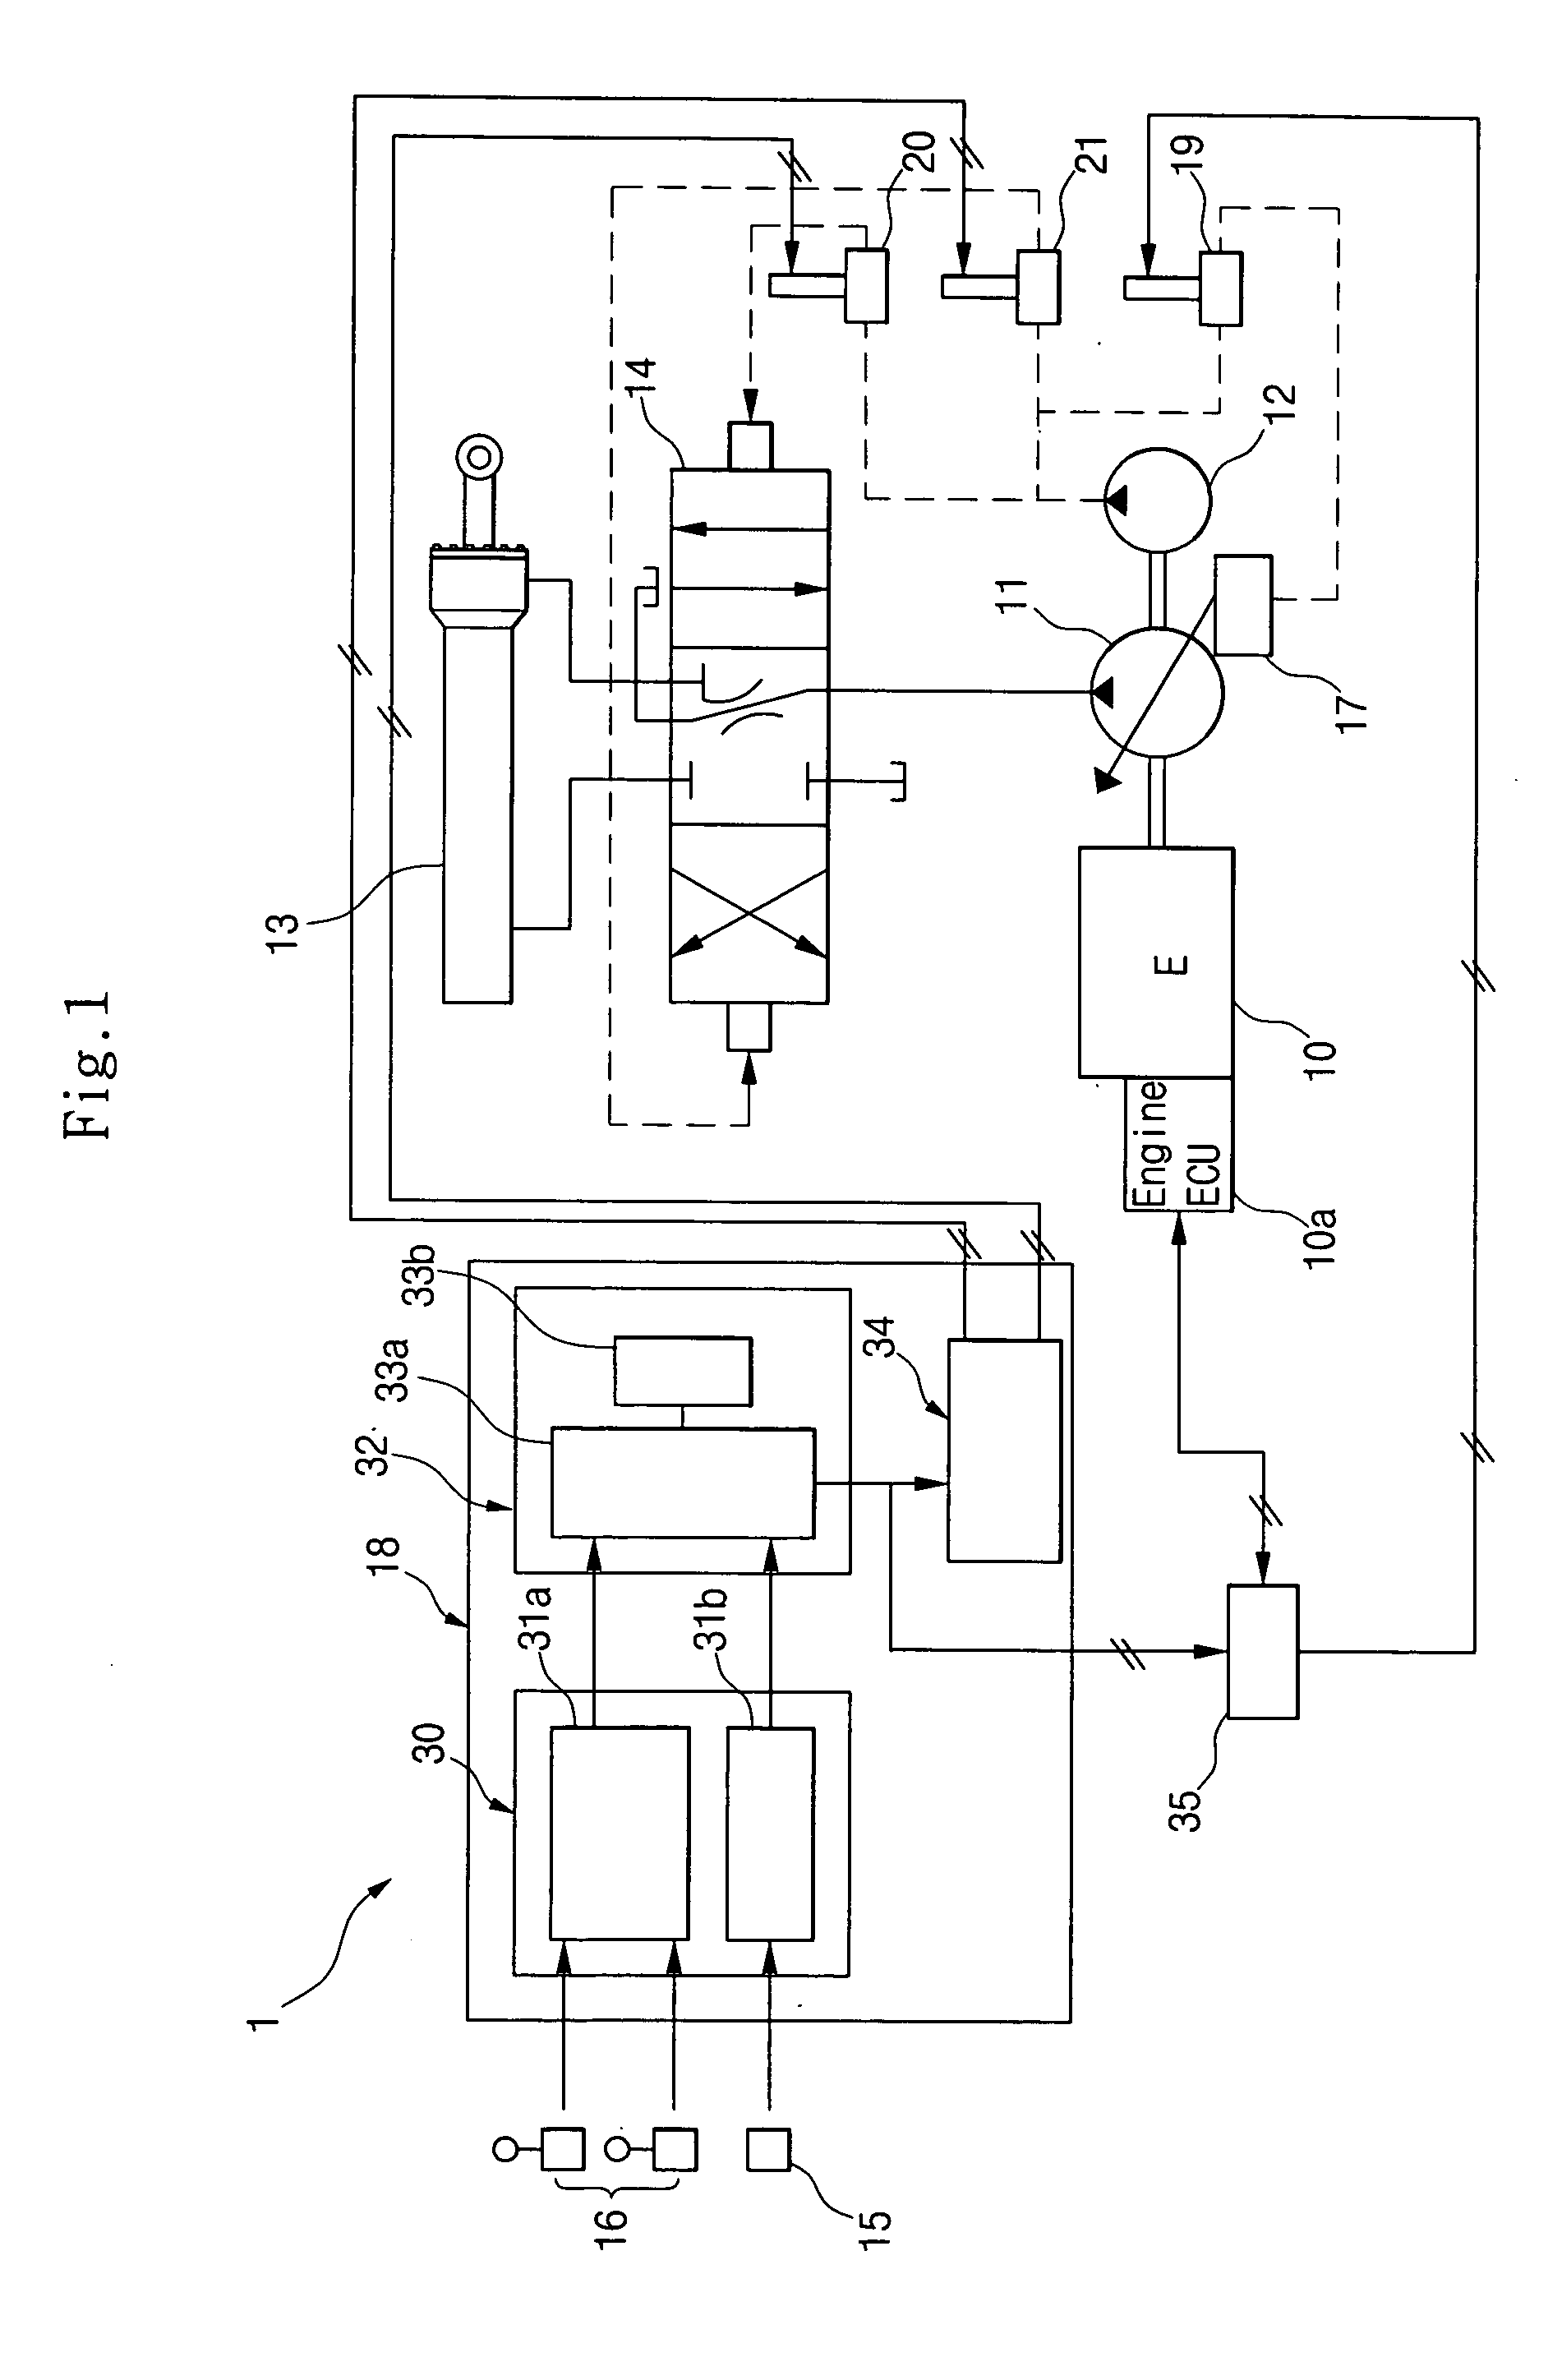 Method for setting response modes of construction vehicle operation lever